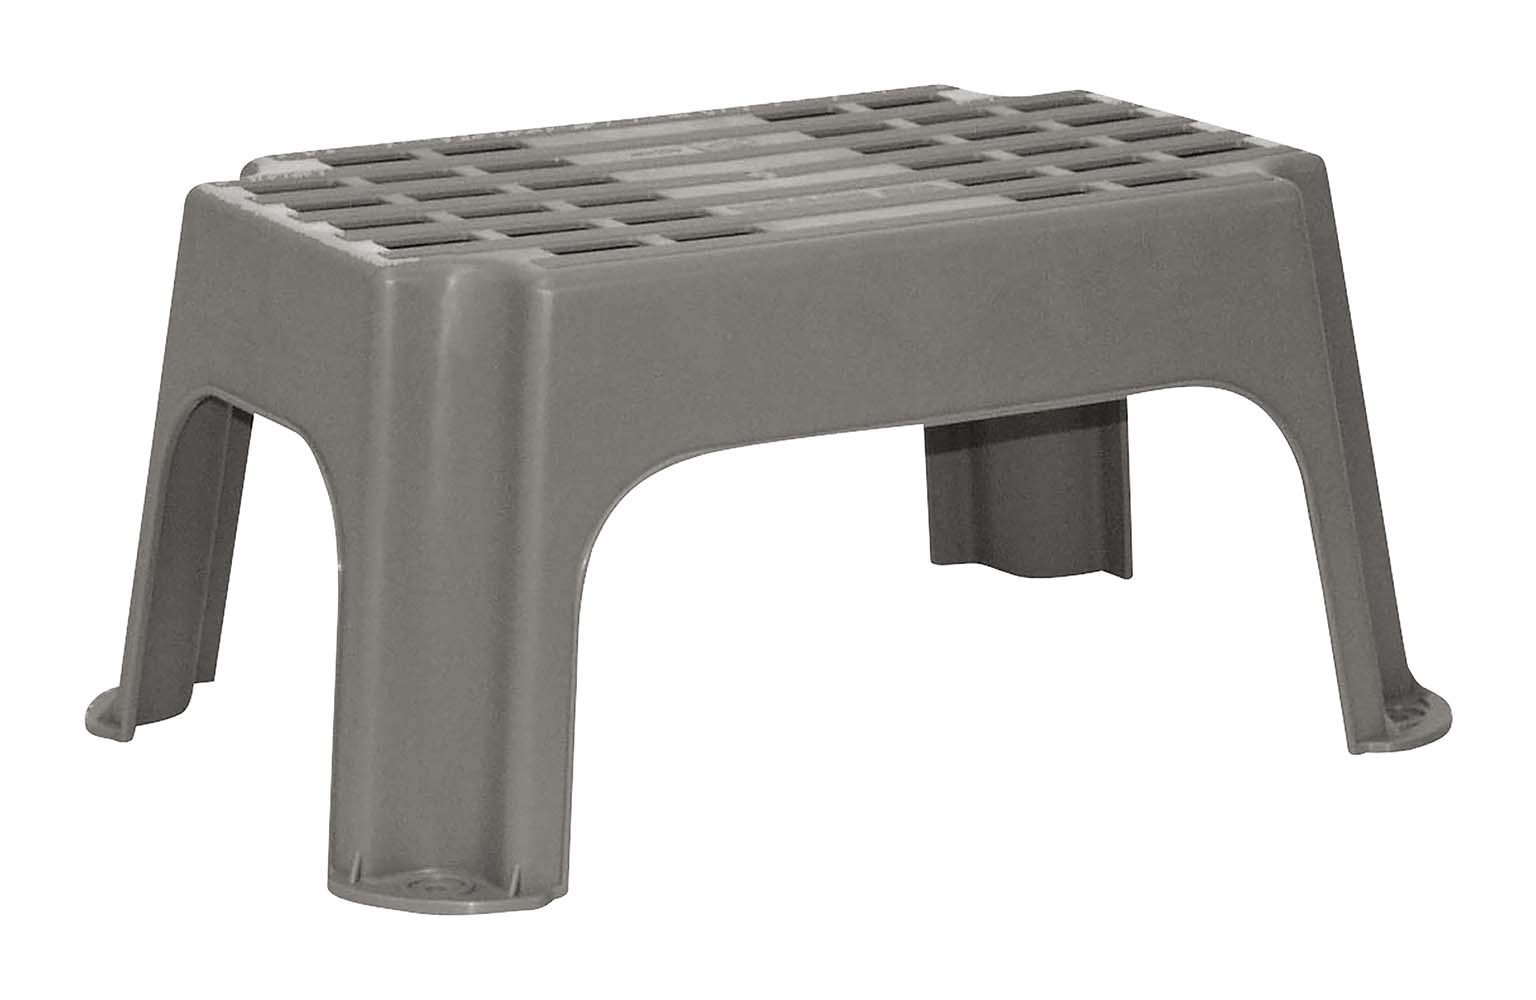 5314963 Classic model step. Extra sturdy and made from heavy quality plastic. Ideal for hard to reach areas, or as a stepping stone for the caravan or camper. Maximum load-bearing capacity: 150 kilogram.